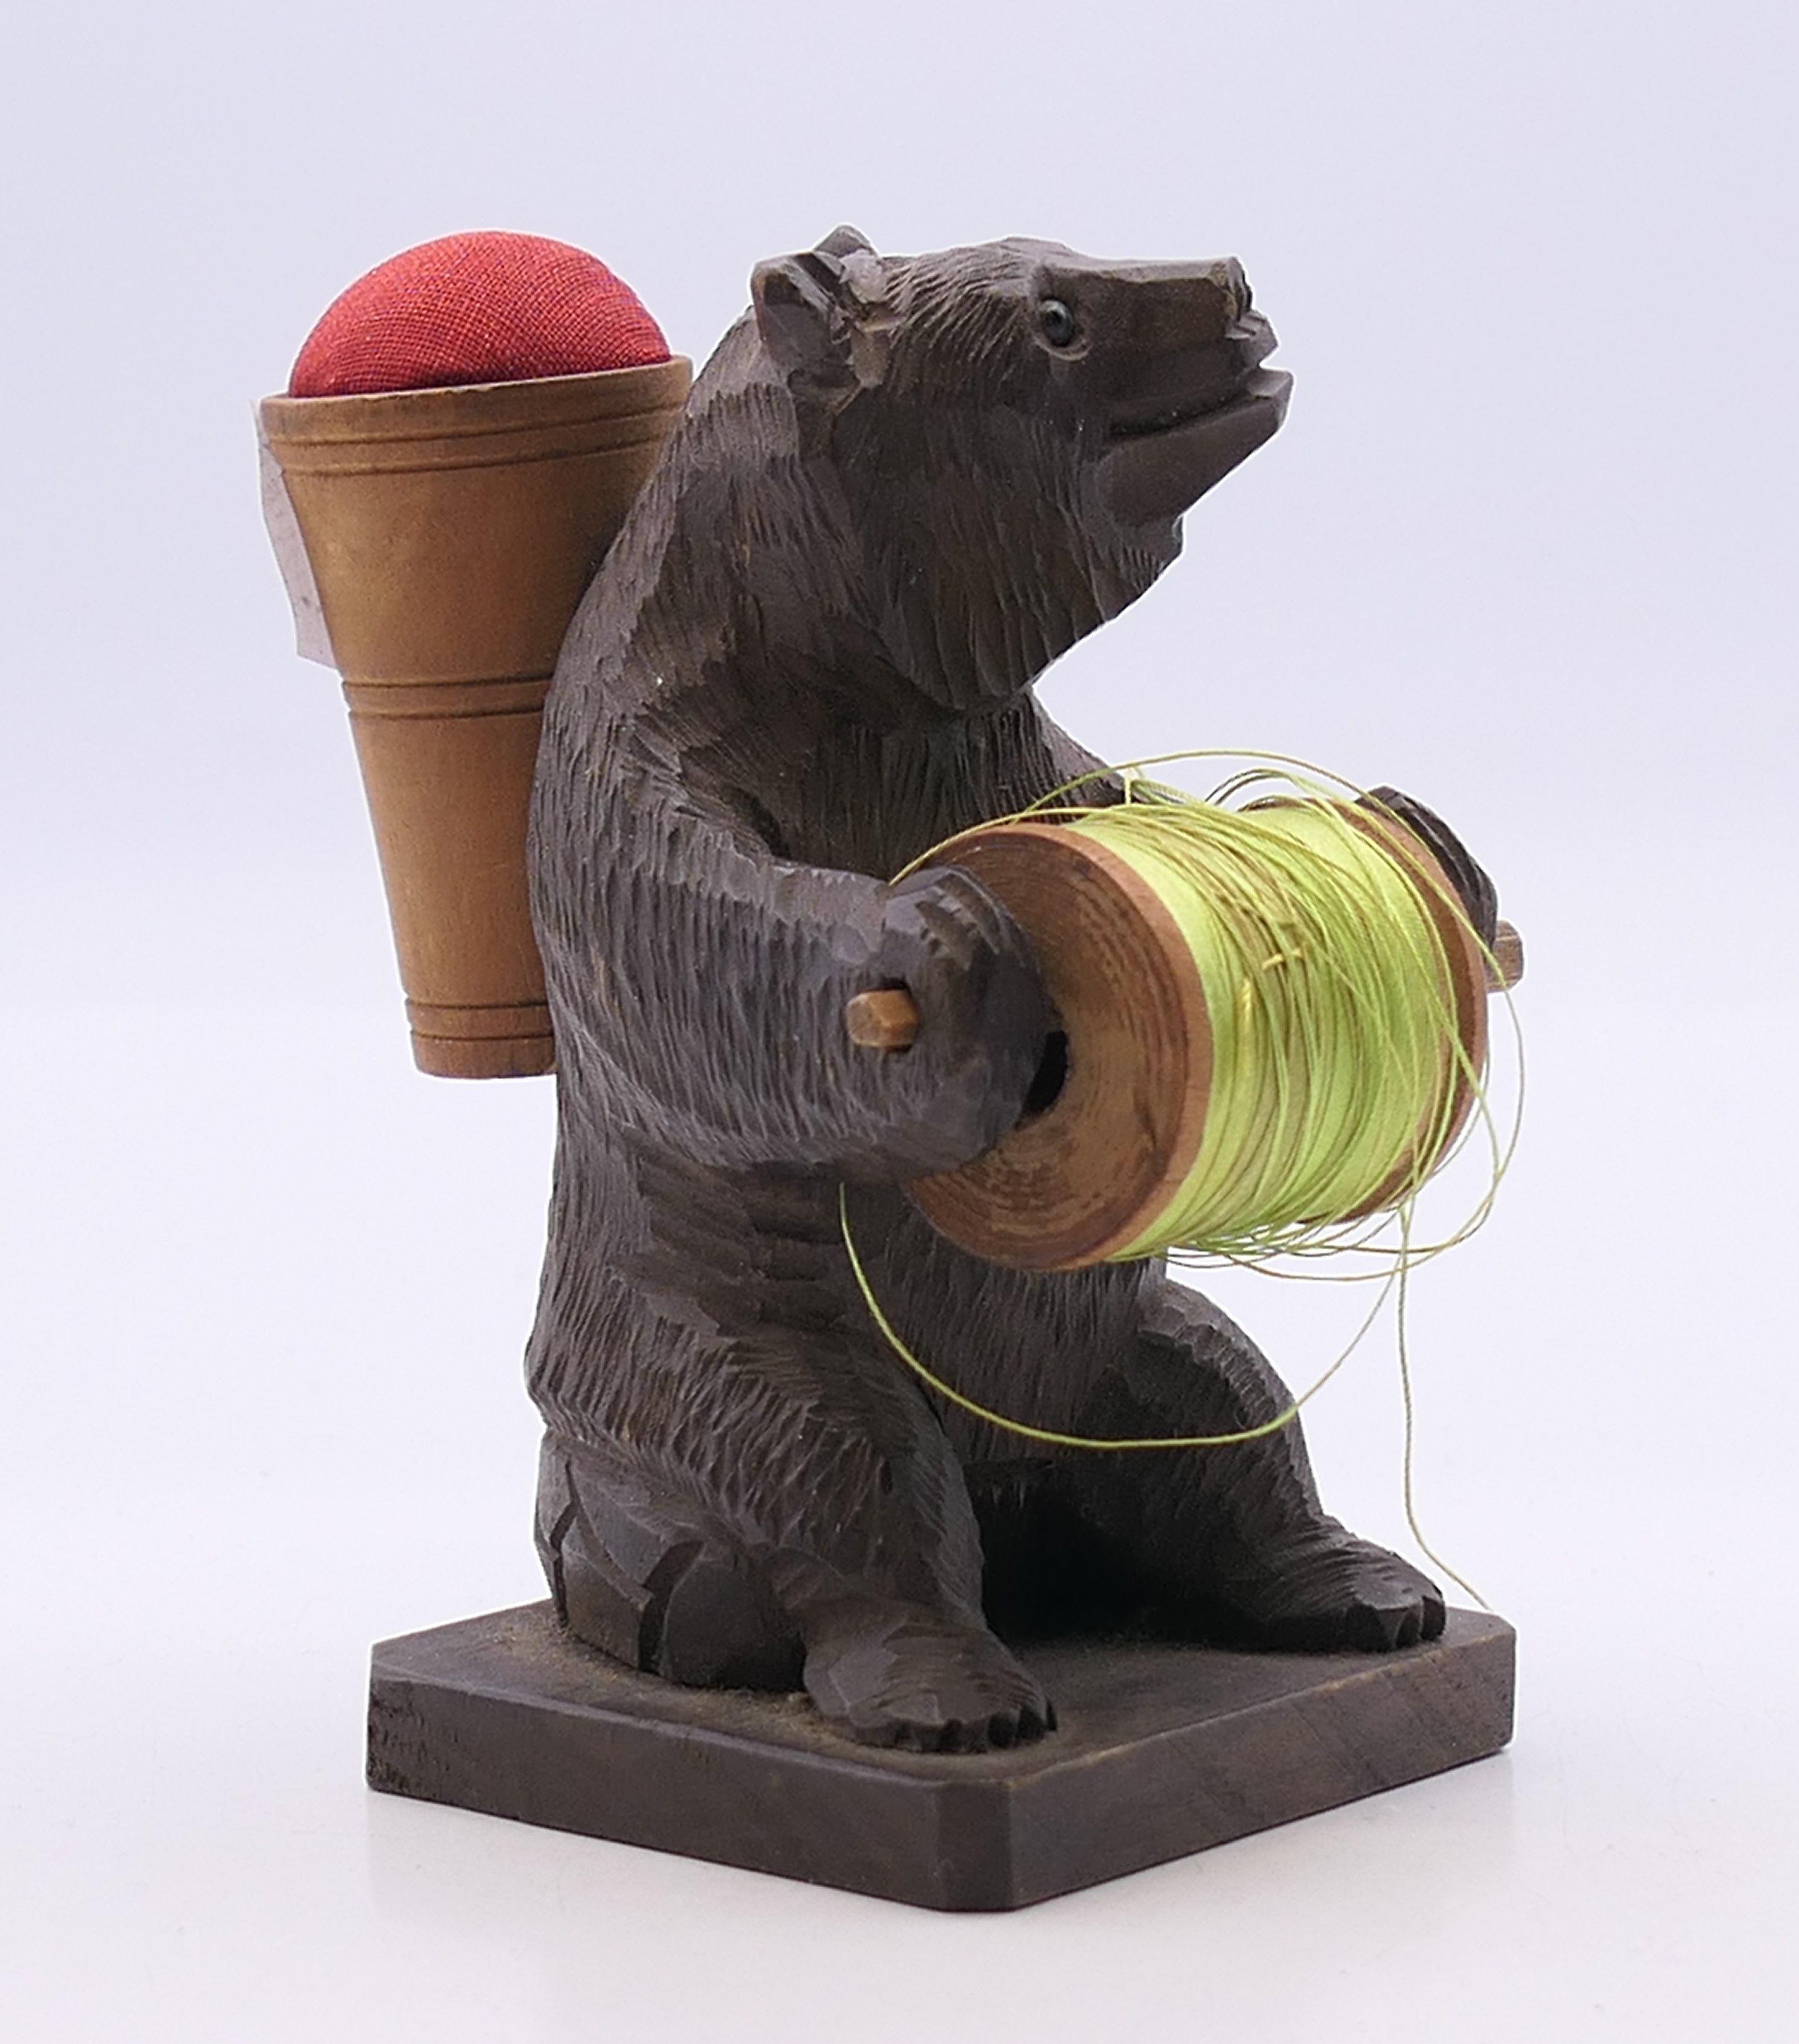 A Blackforest cotton reel holder and pin cushion formed as a bear. 9 cm high.